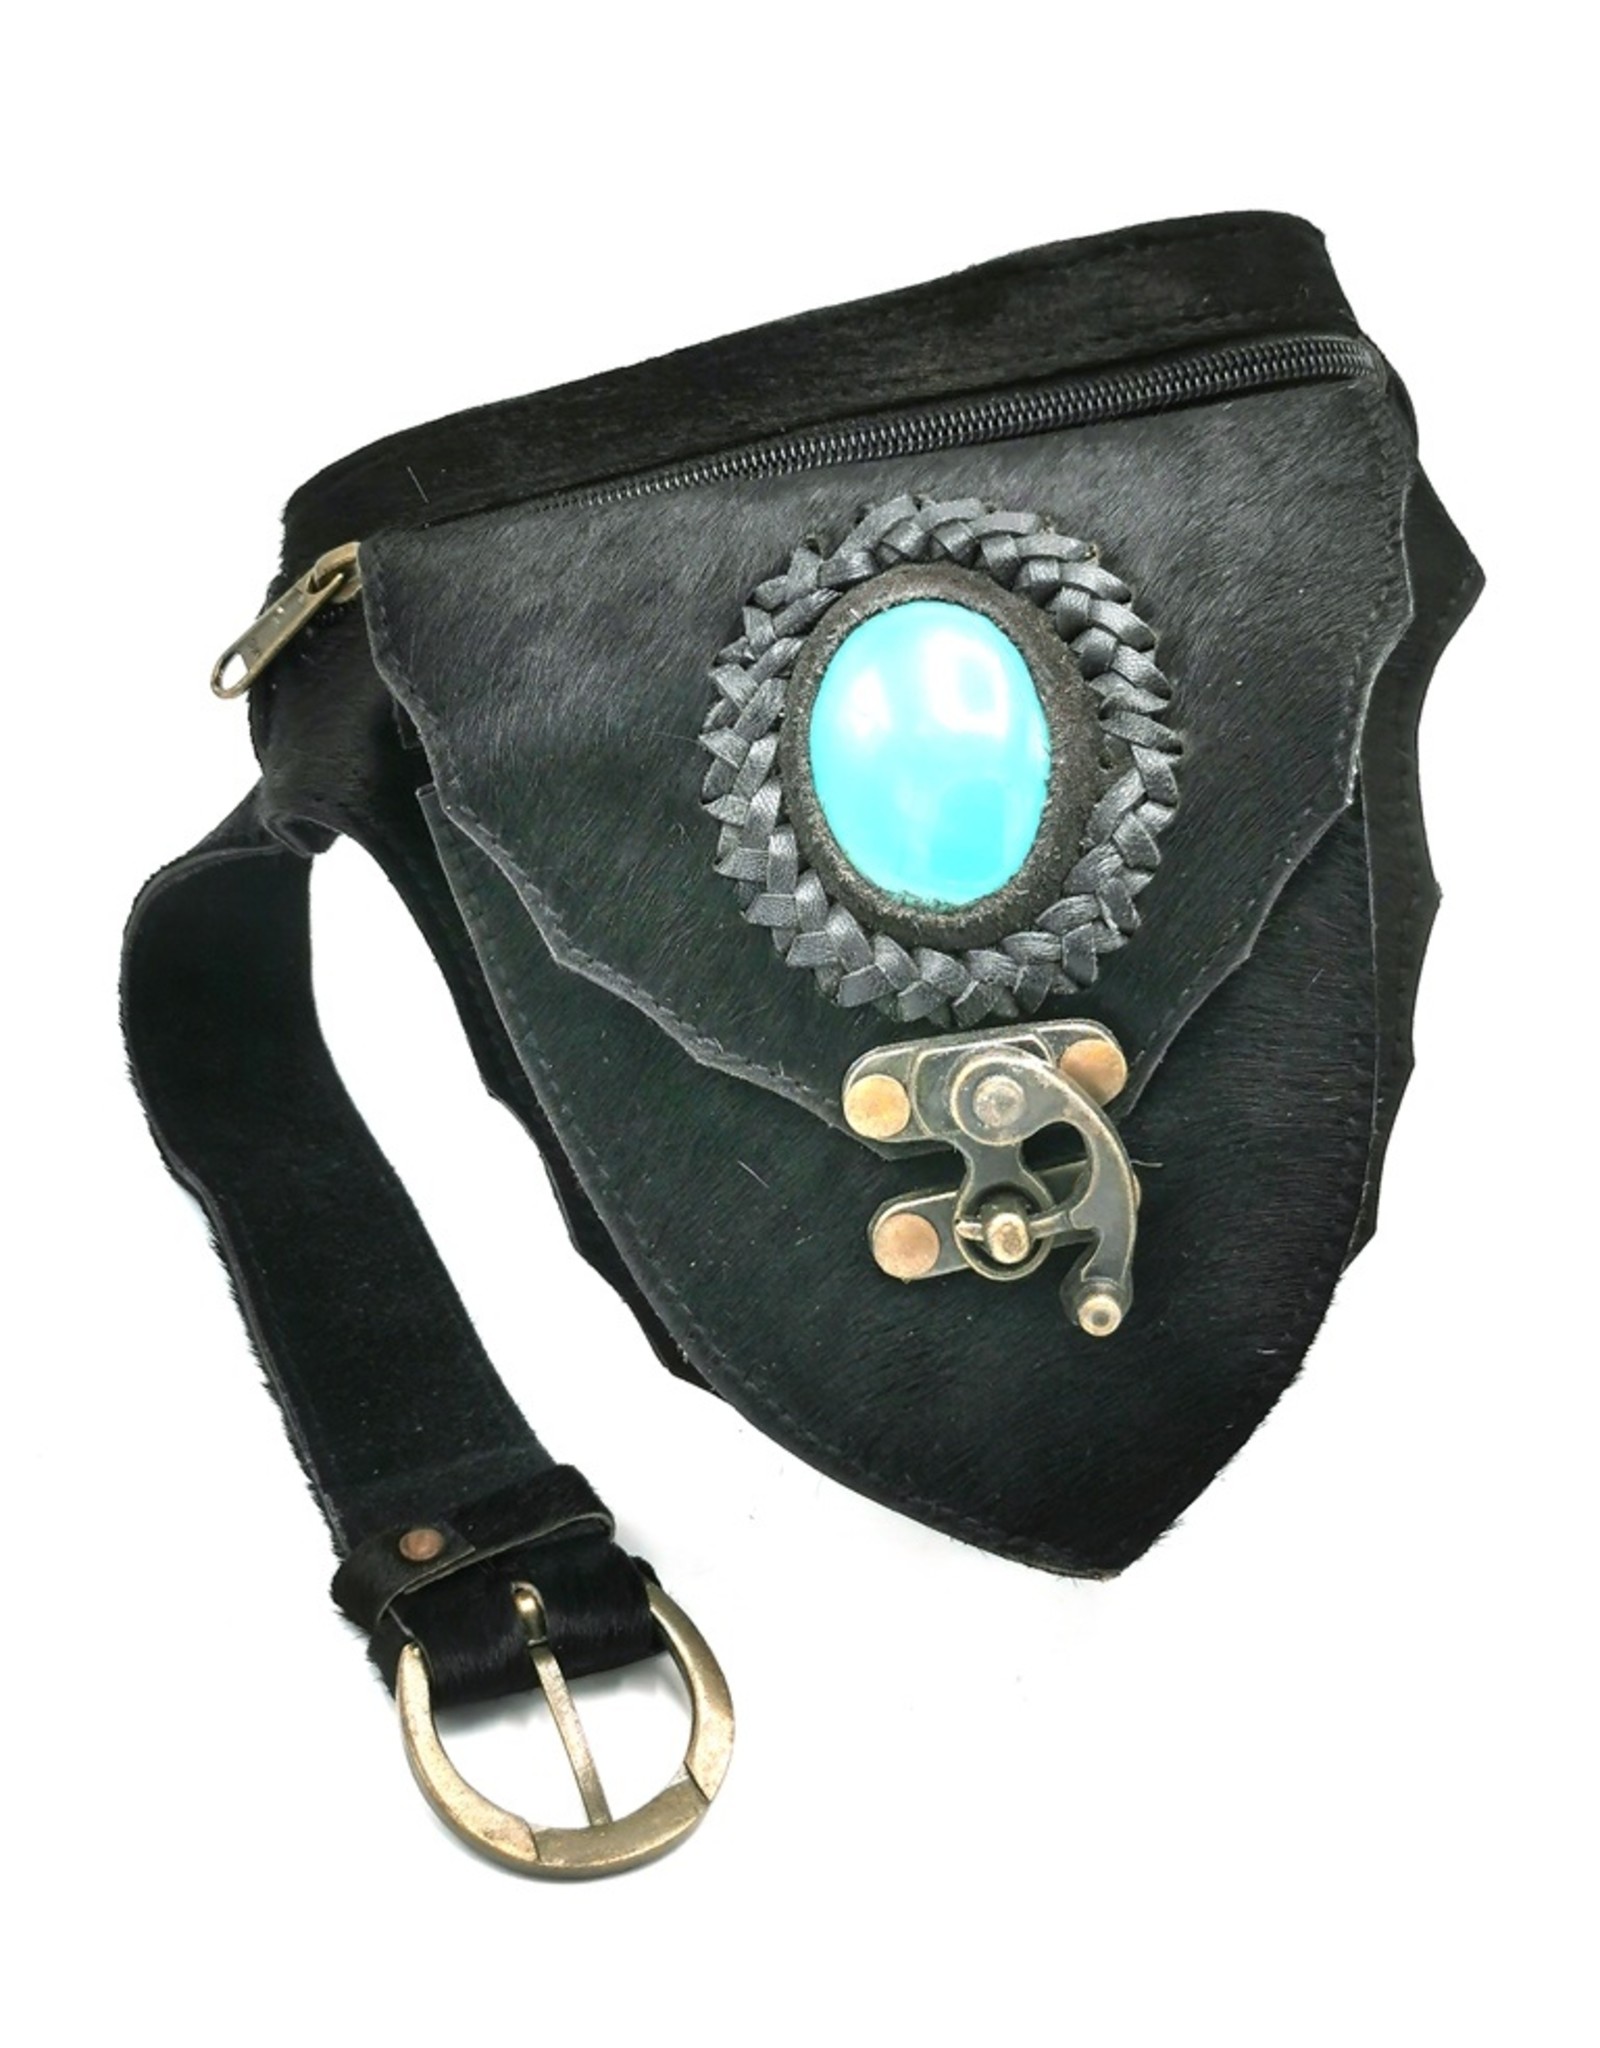 Trukado Leather Festival bags, waist bags and belt bags - Cowhide Waist bag with Turquoise Stone and hook